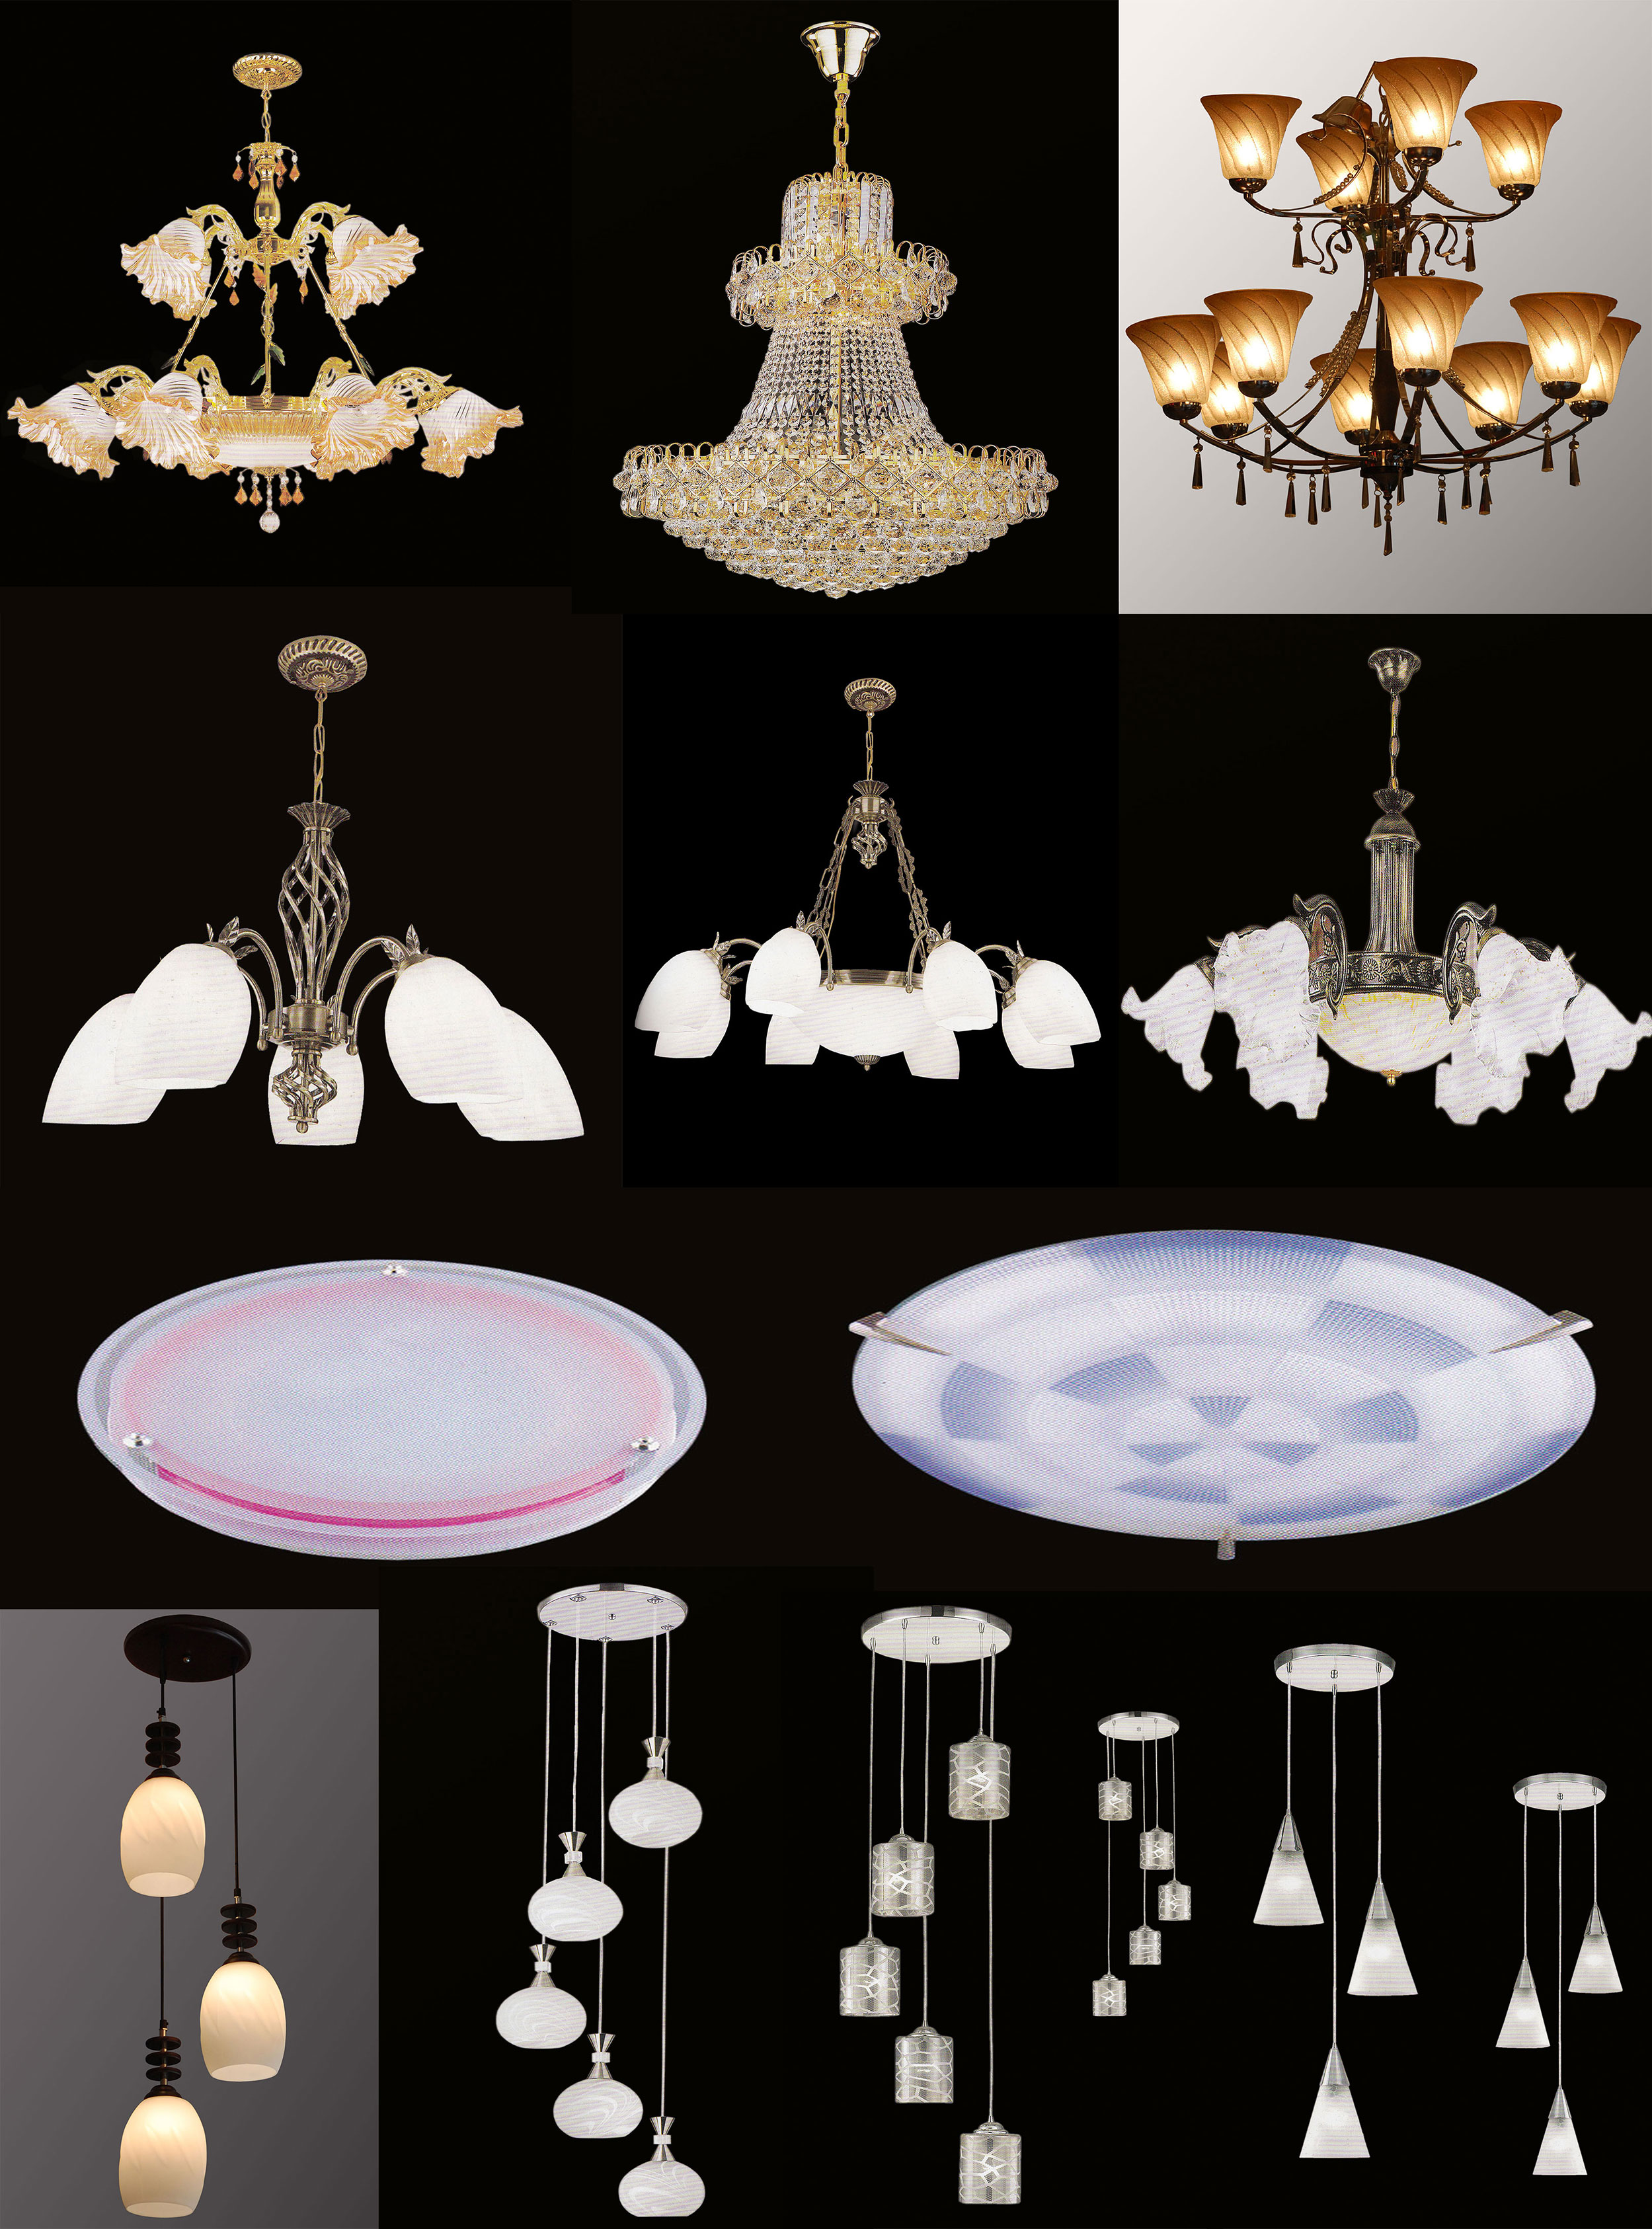 products_venus_lights_and_lamps_bacolod_city (1)